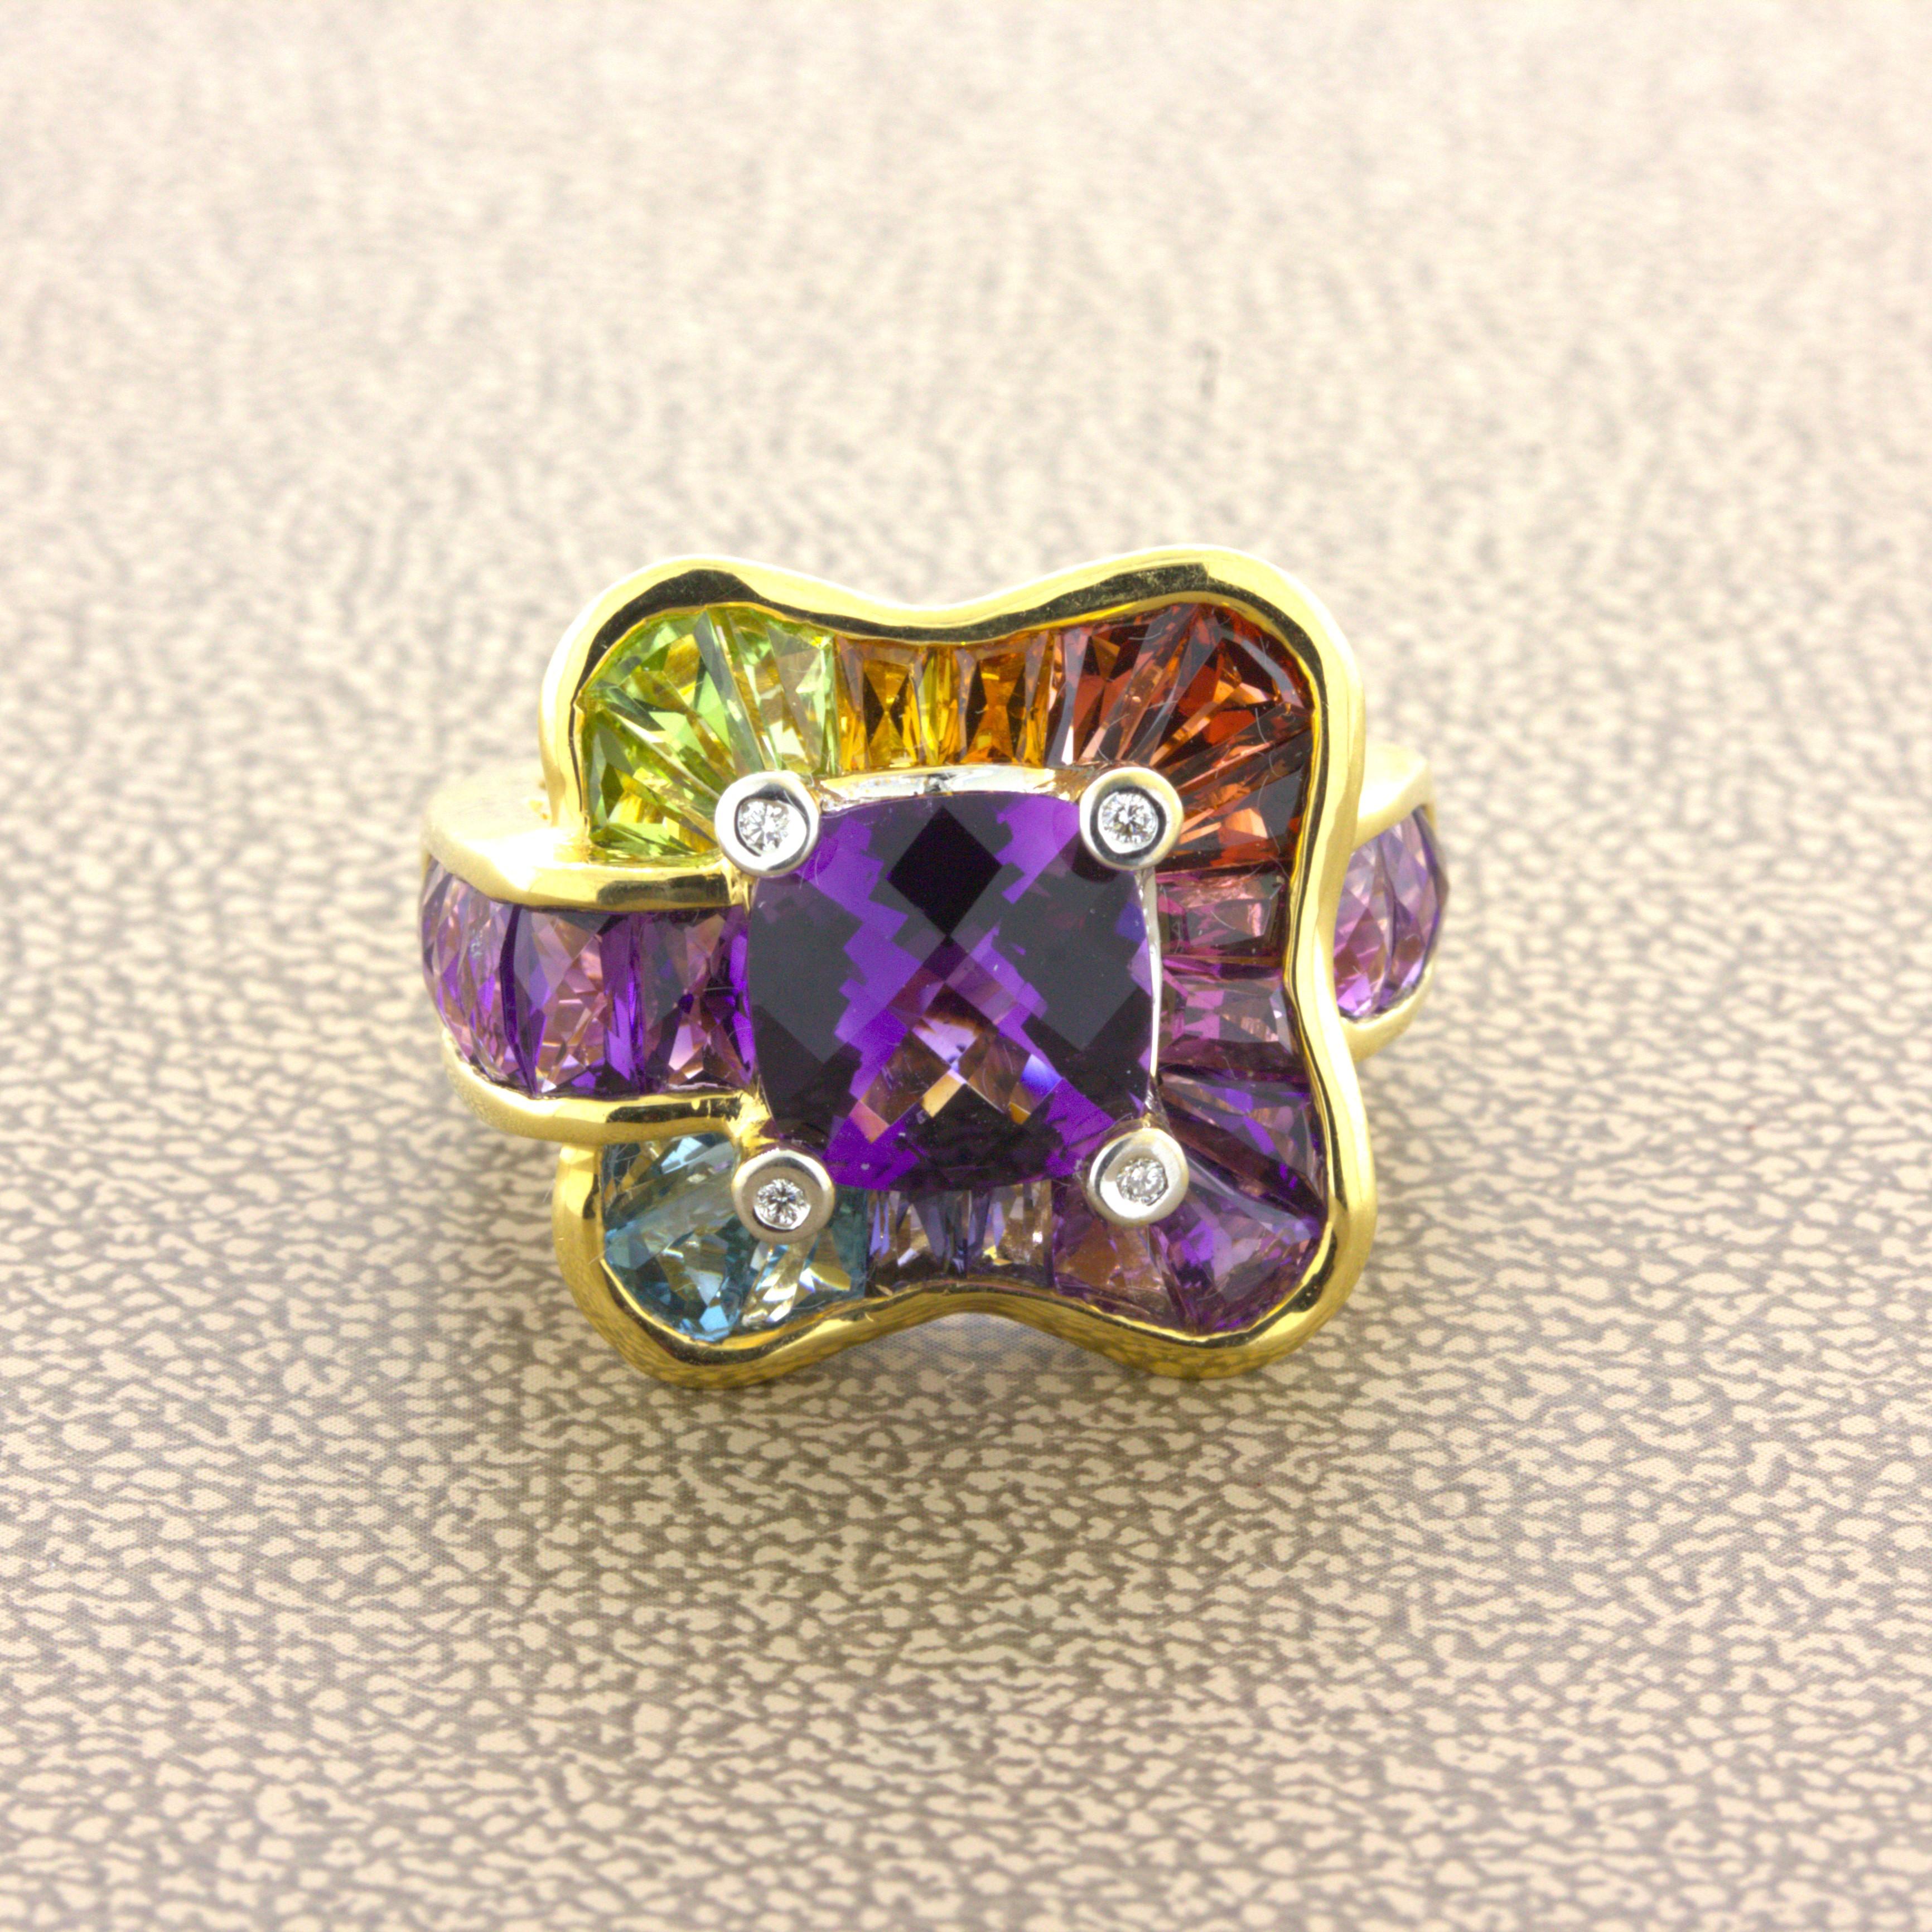 An original piece by designer Bellarri featuring a 2.04 carat amethyst surrounded by a wide array of multi-colored gemstones. The gemstones around the amethyst include blue topaz, peridot, garnet, and additional amethyst which weigh a total of 5.26